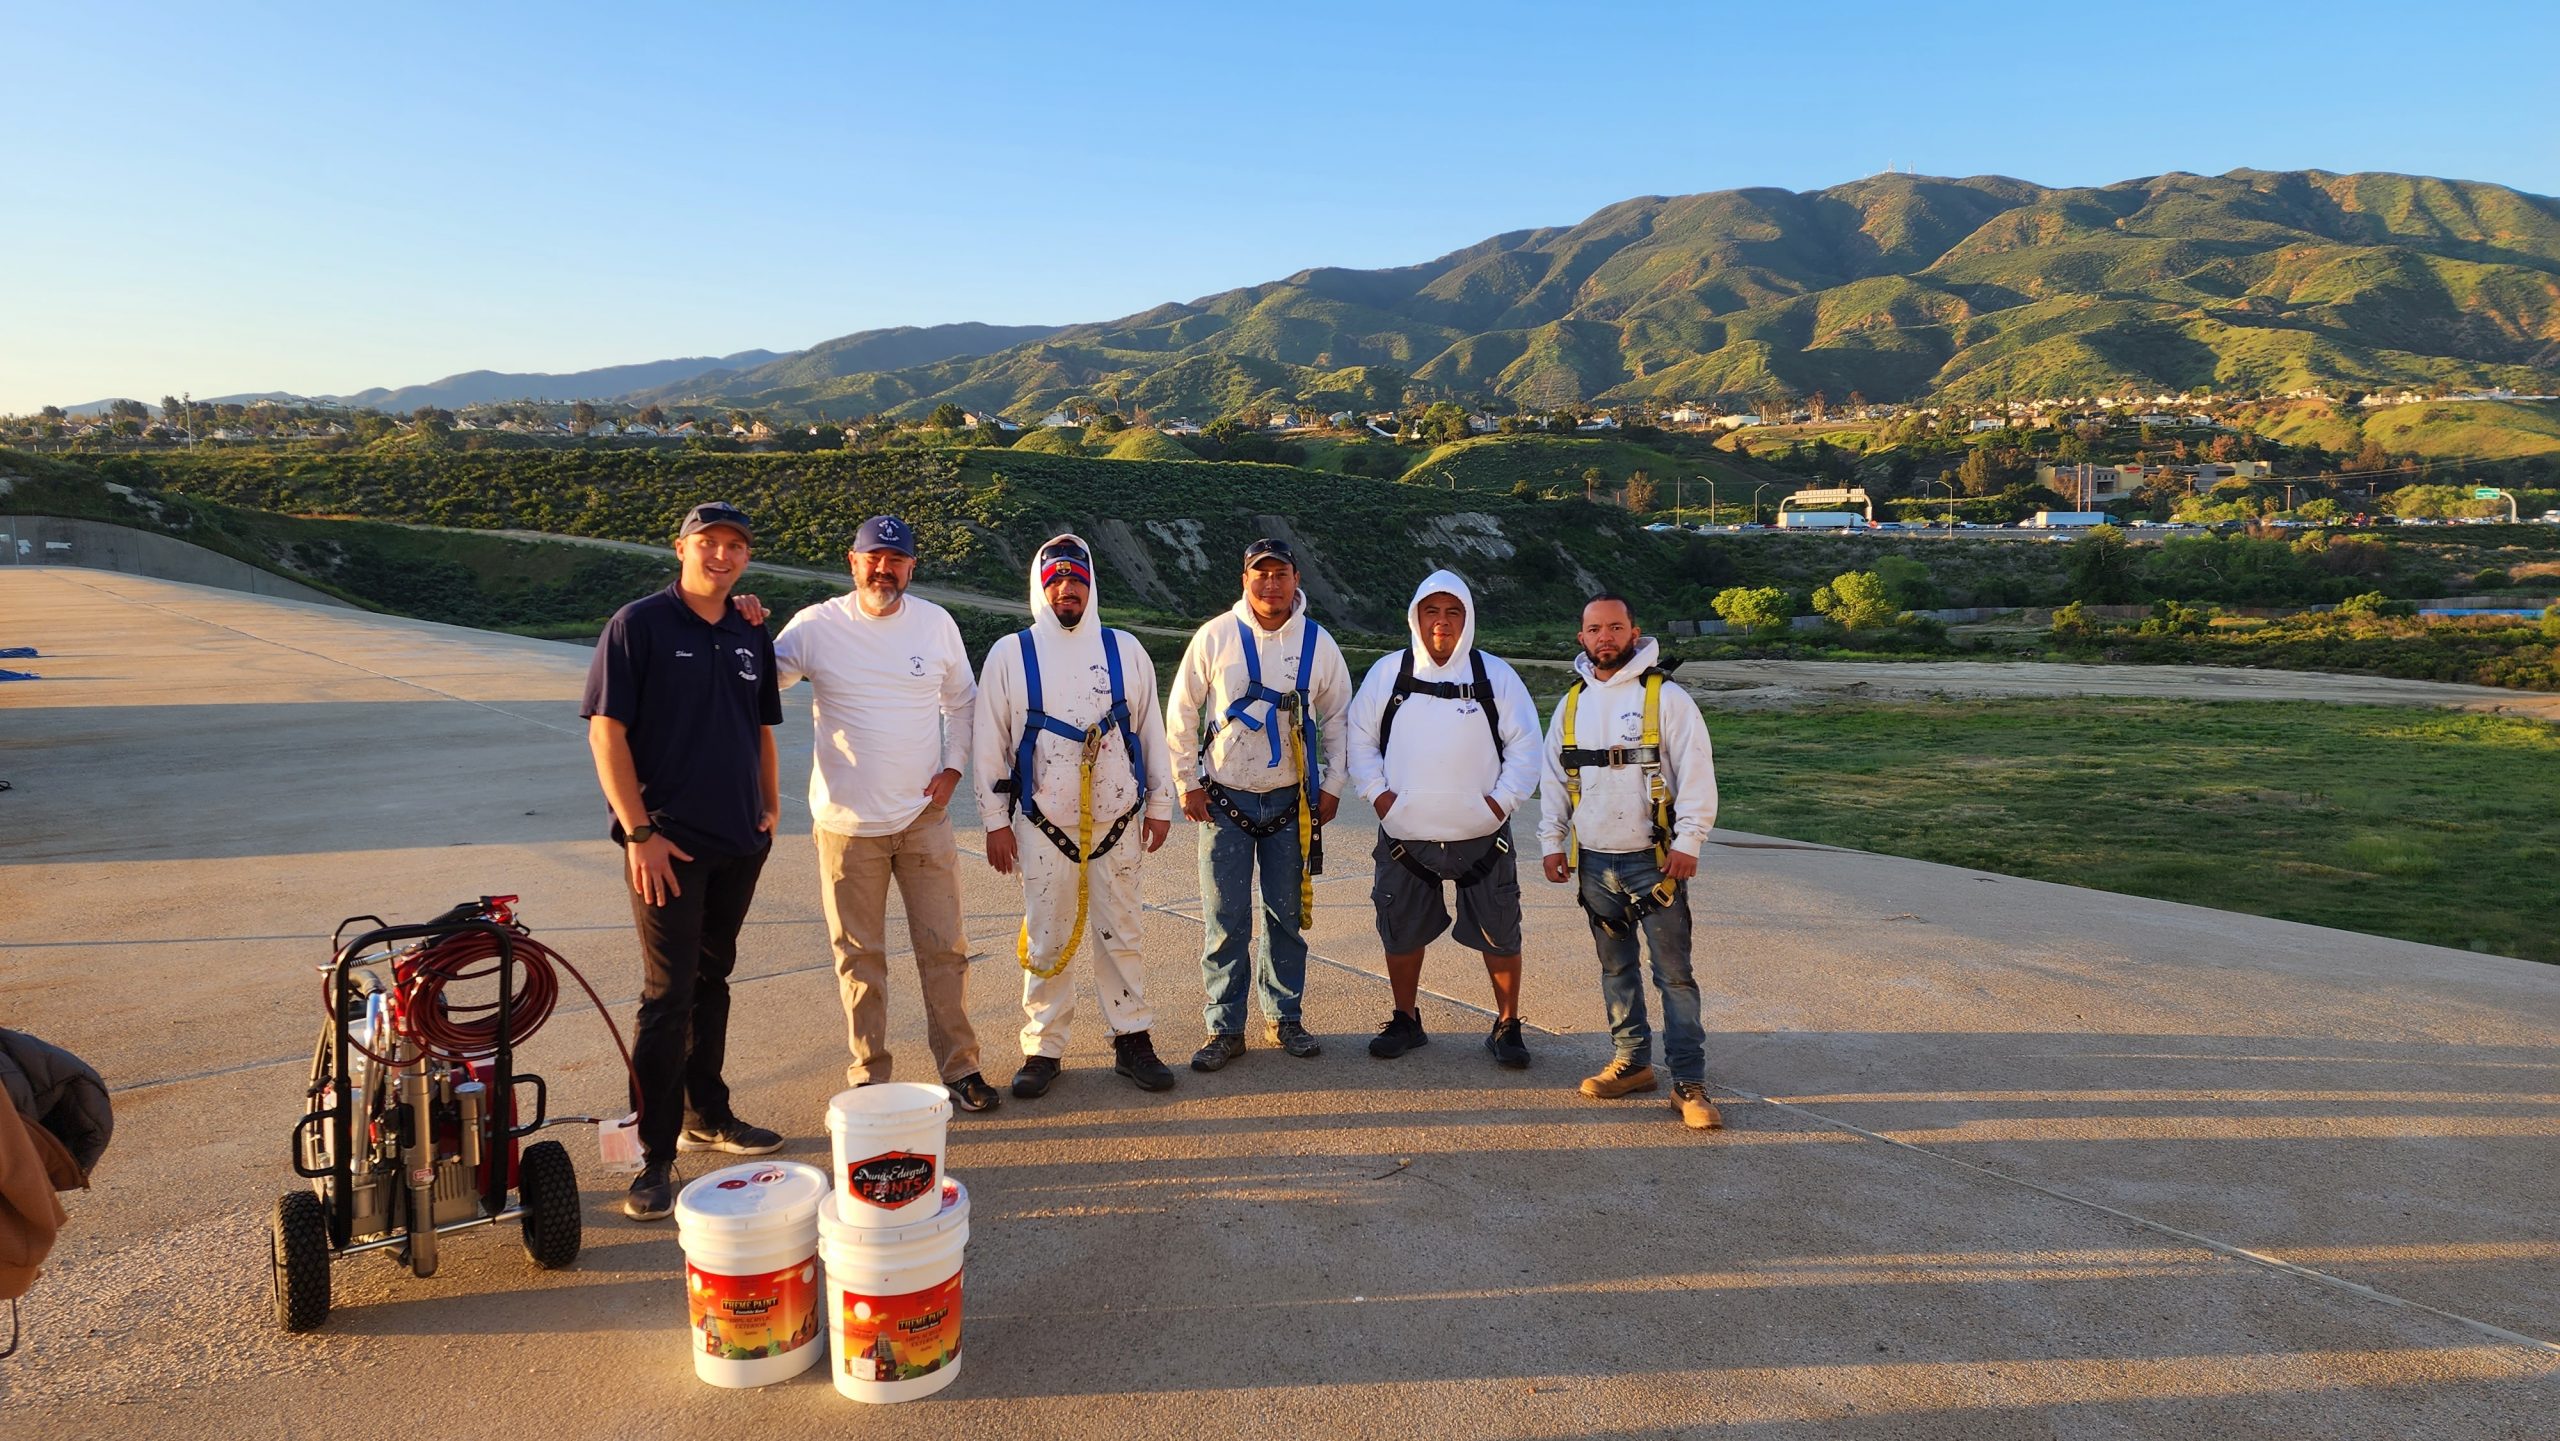 The Best Dam Painters in Orange County: Our Painting Journey at Prado Dam